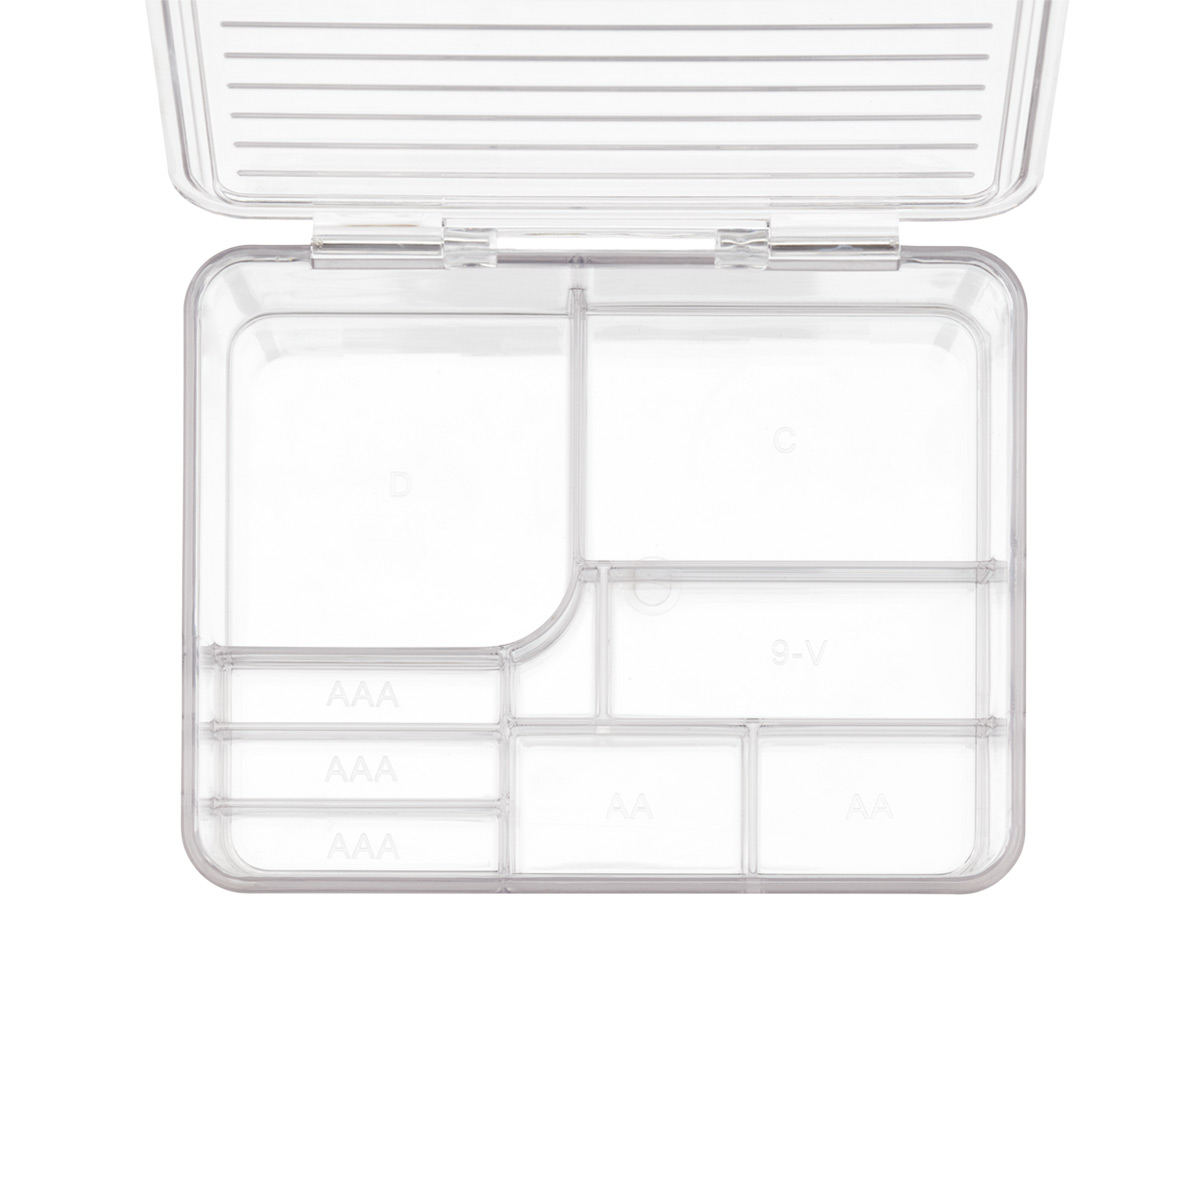 iDesign Recycled Plastic Divided Organizer, Battery Insert